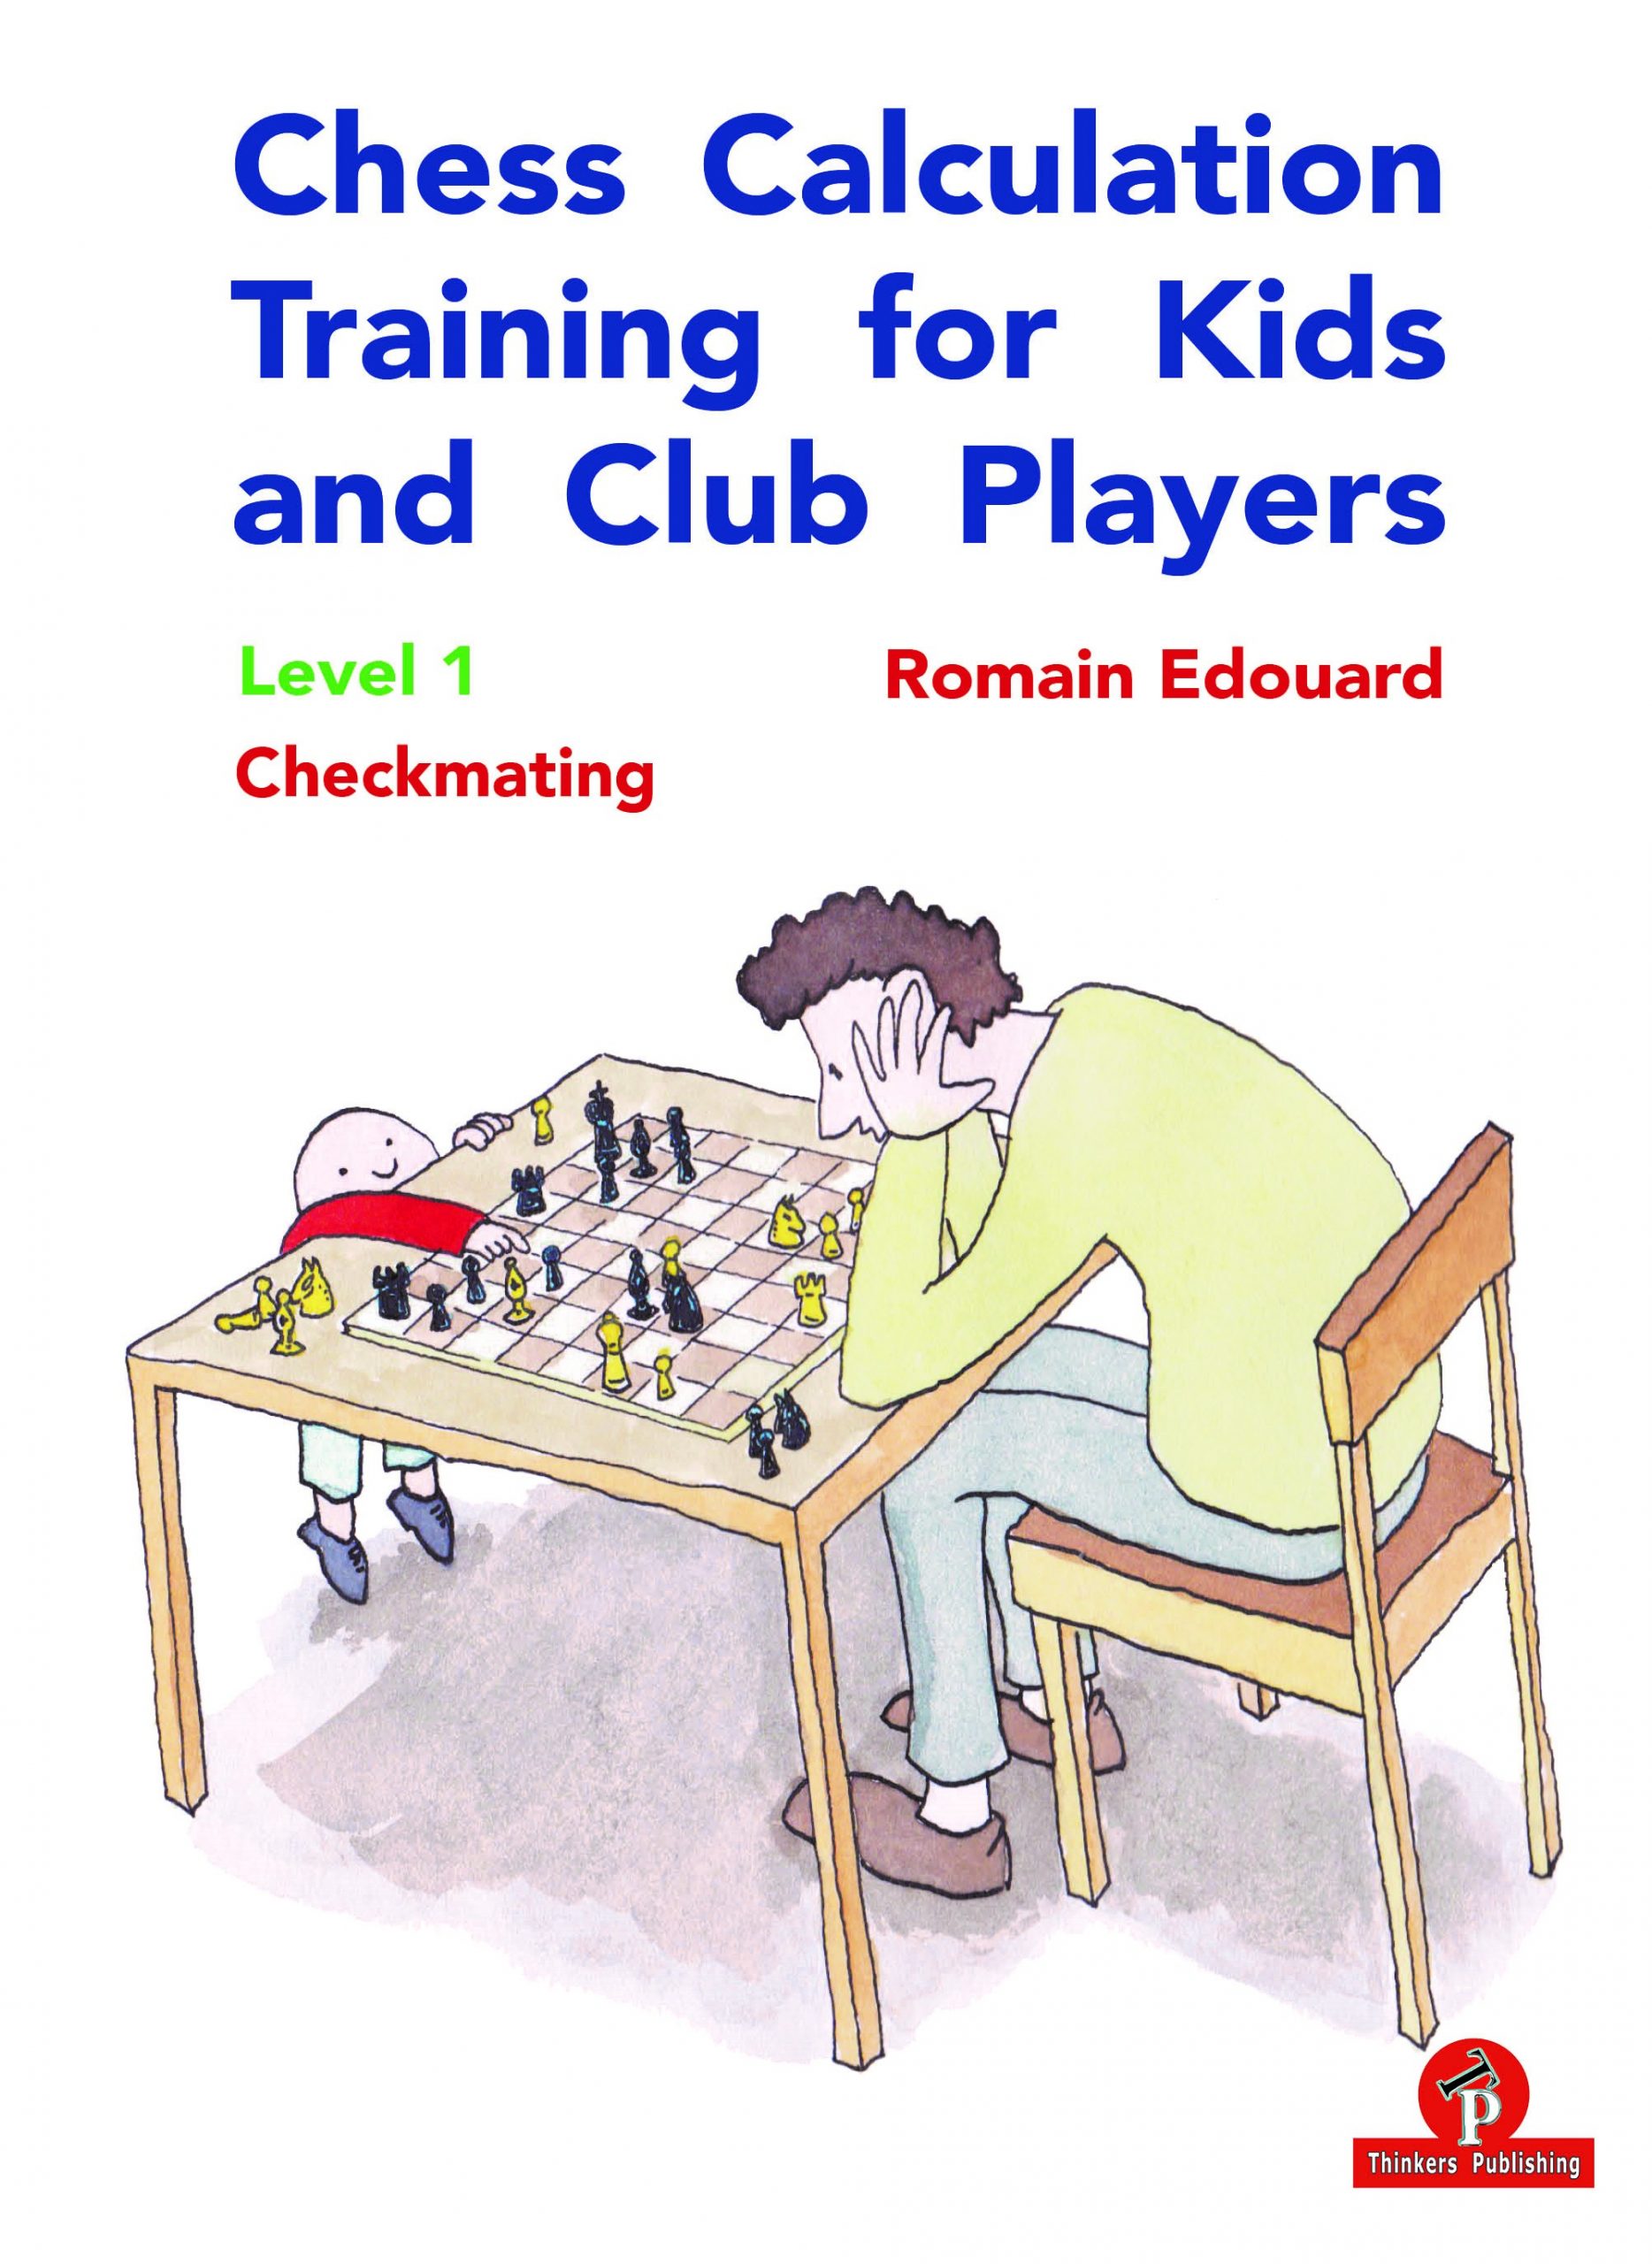 Edouard: Chess Calculation Training for Kids and Club Players Level 1 - Checkmating